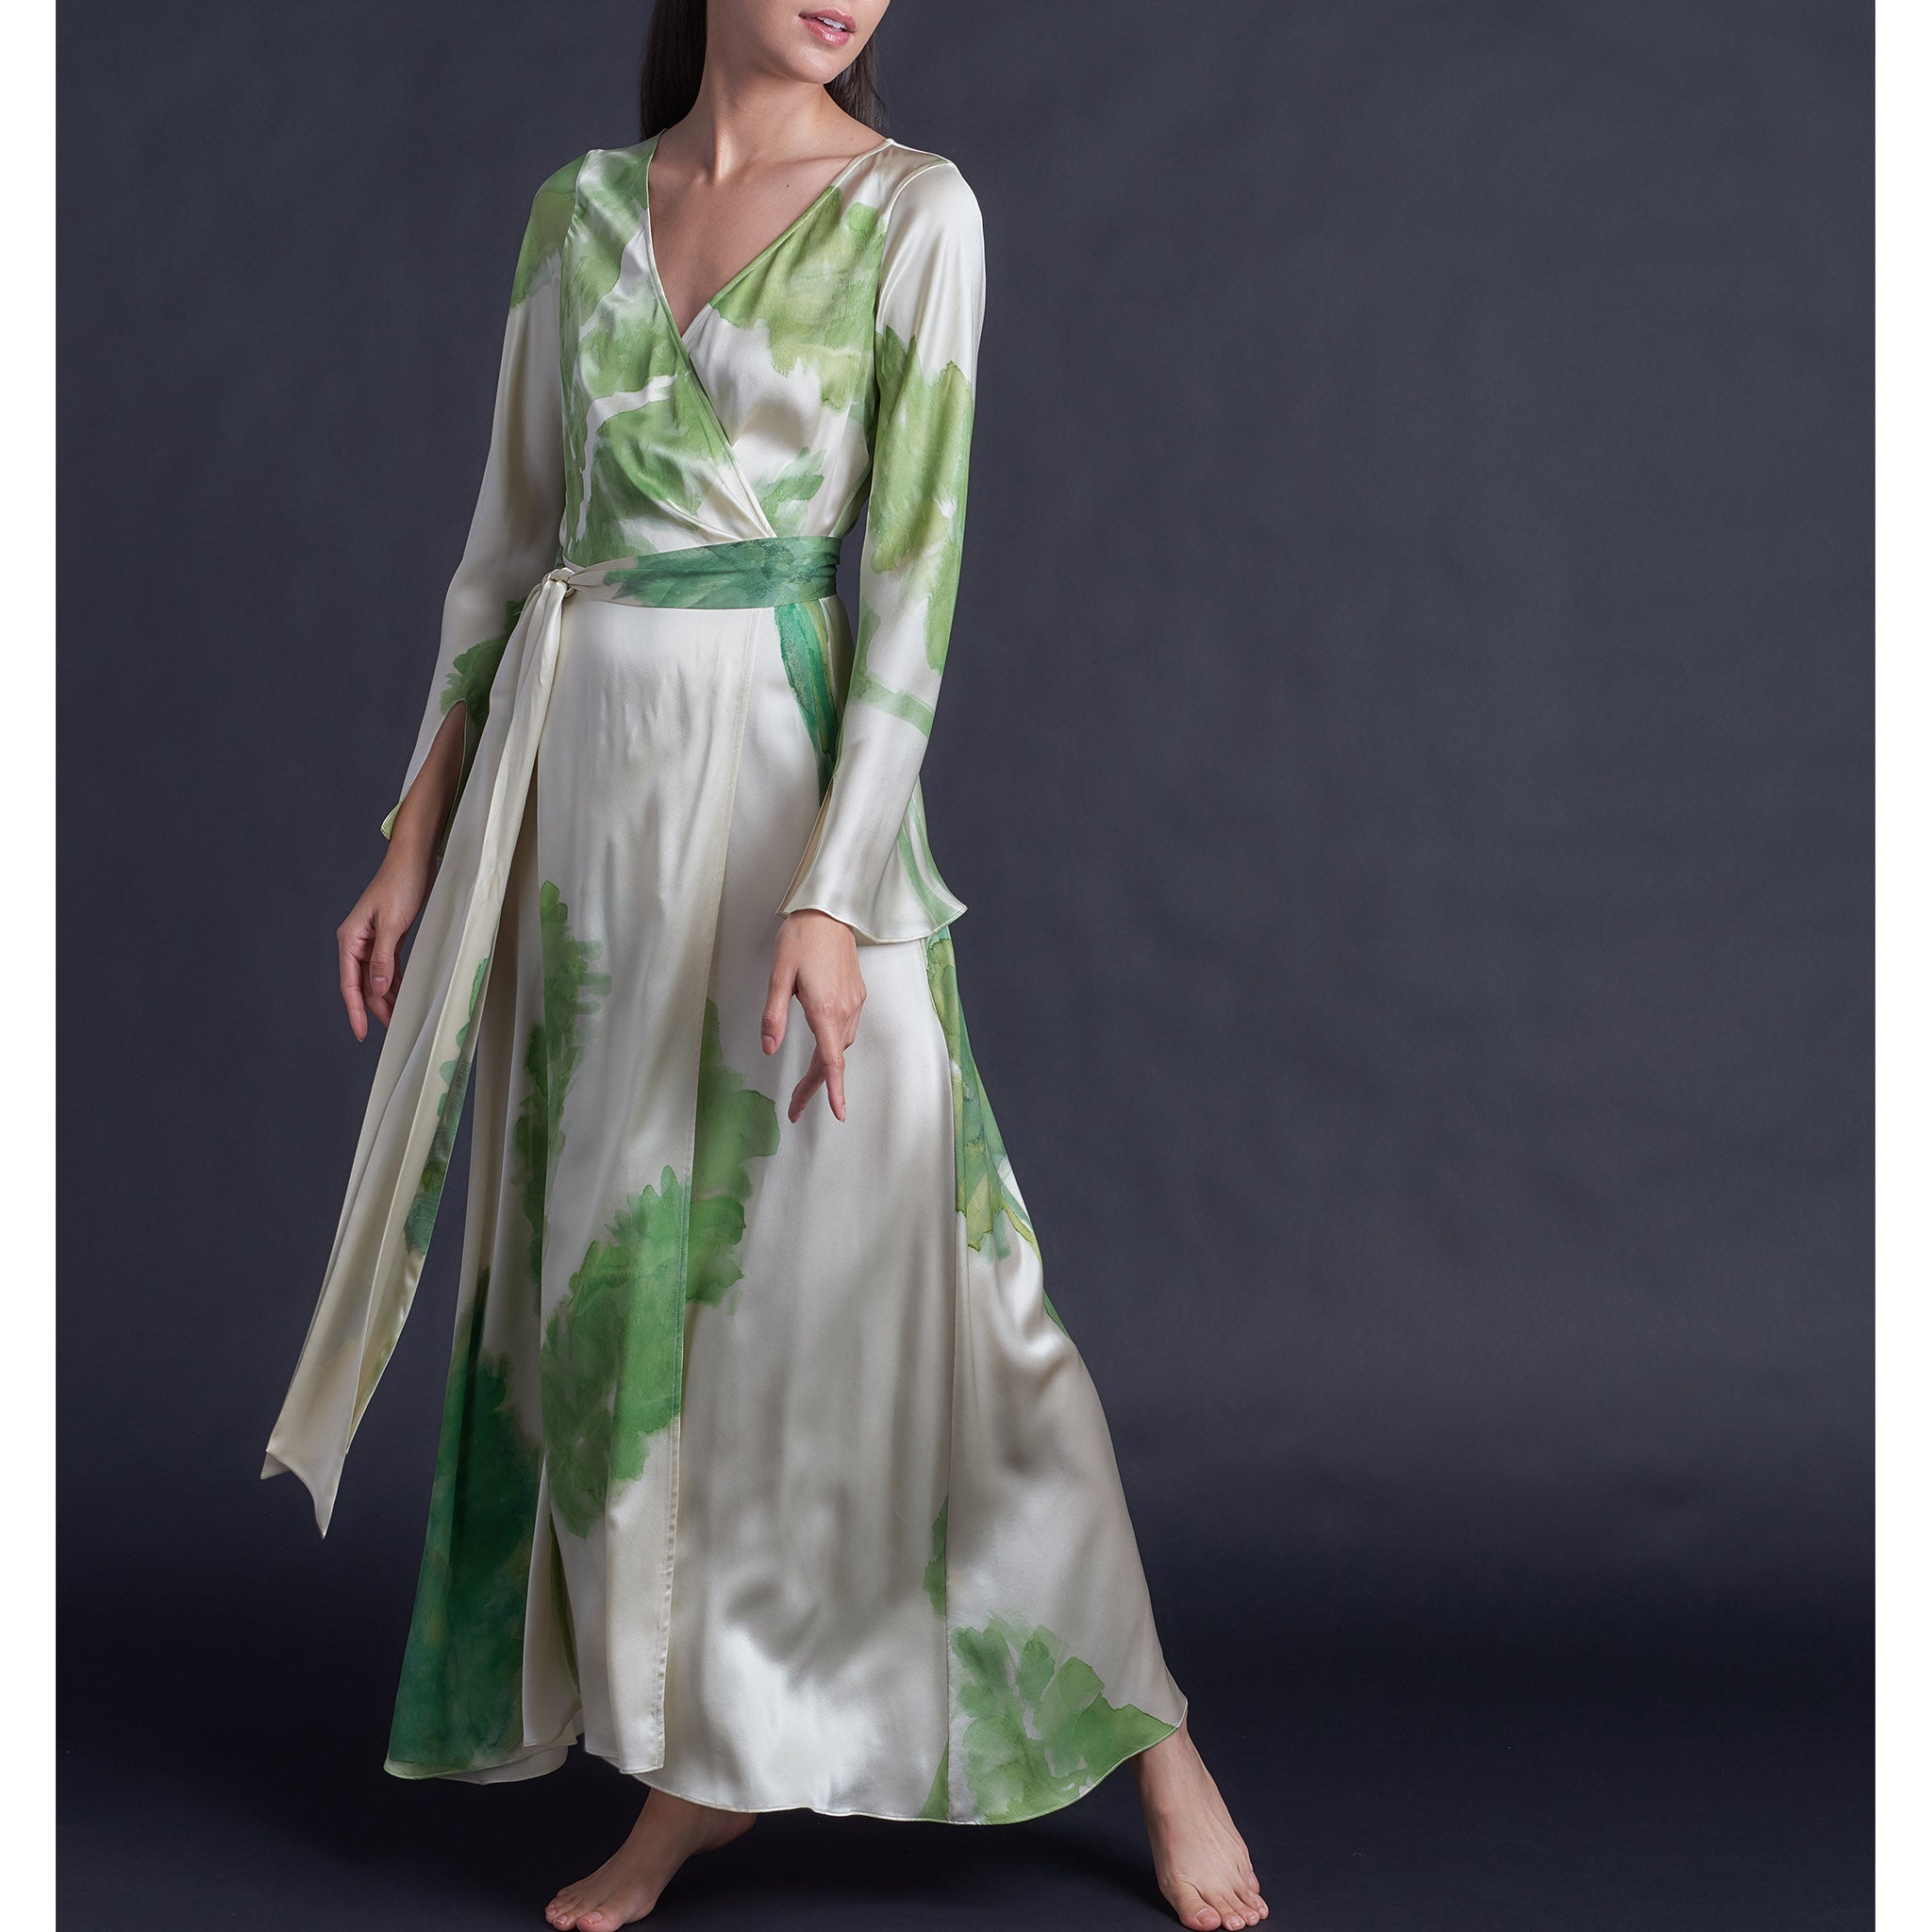 One of a Kind Hand Painted Iris Silk Satin Dressing Gown